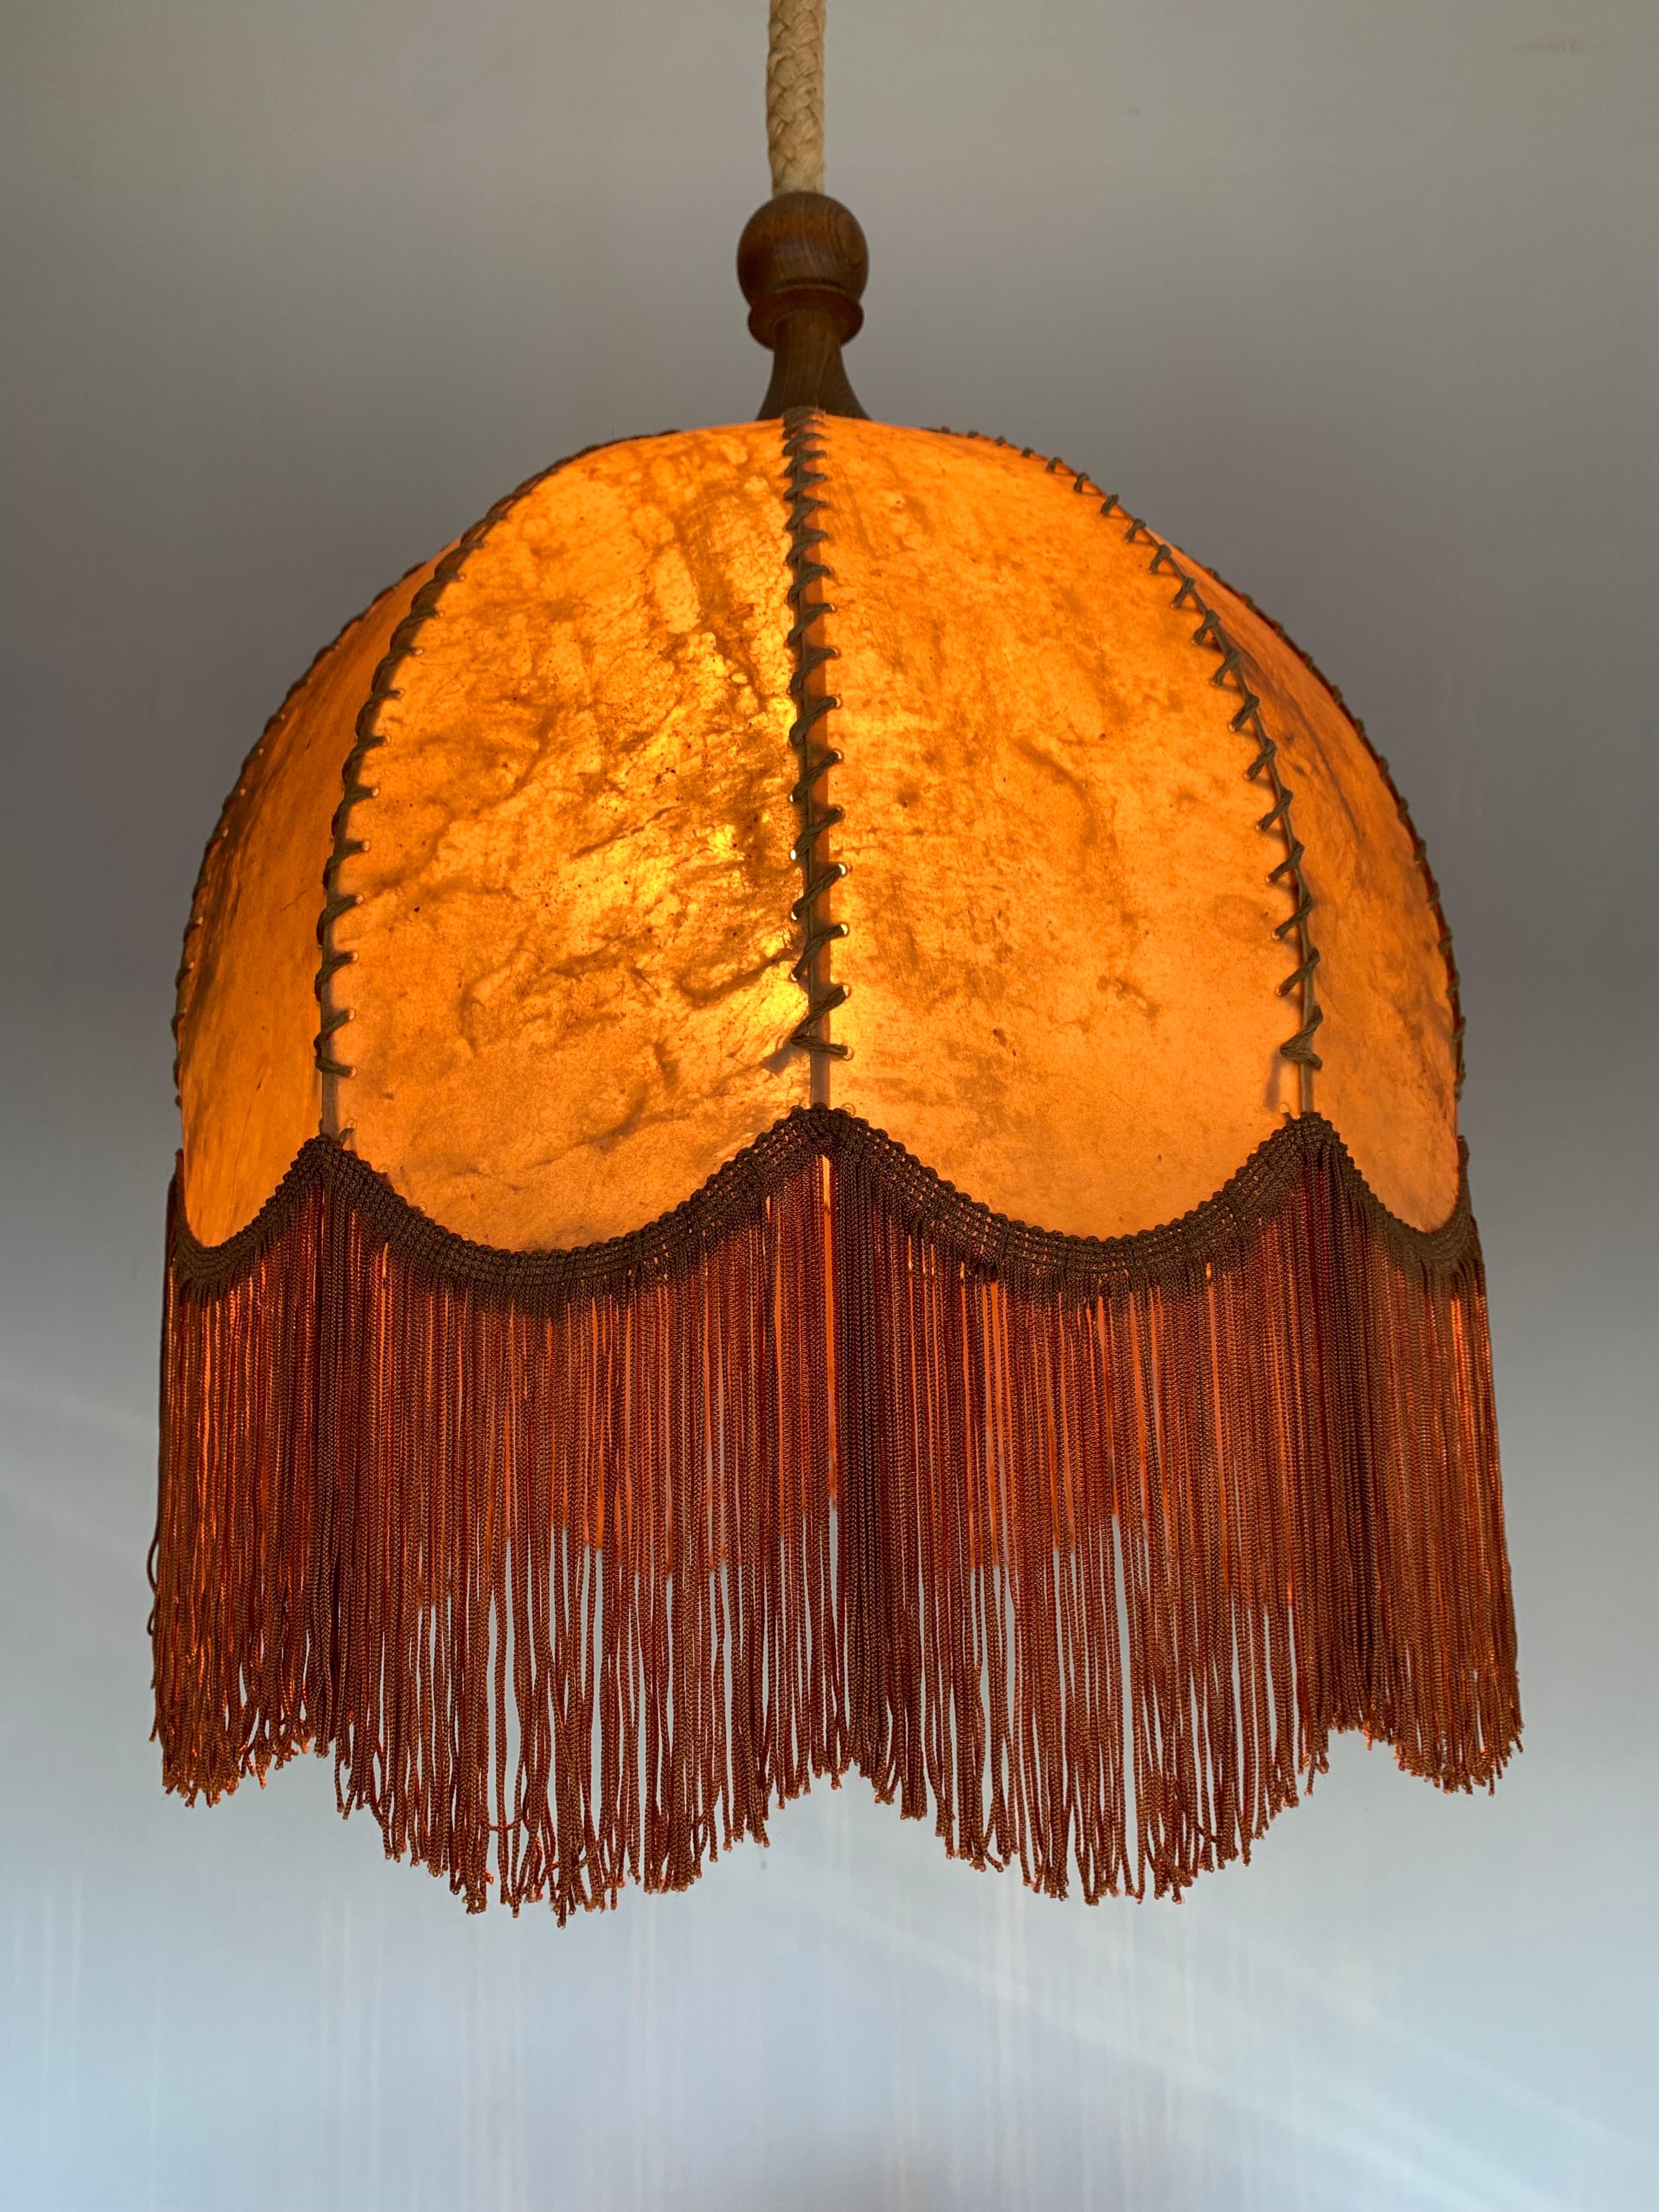 Rustic Good Looking Home Design Leather, Fringes, Wood and Rope Pendant Light, 1930s